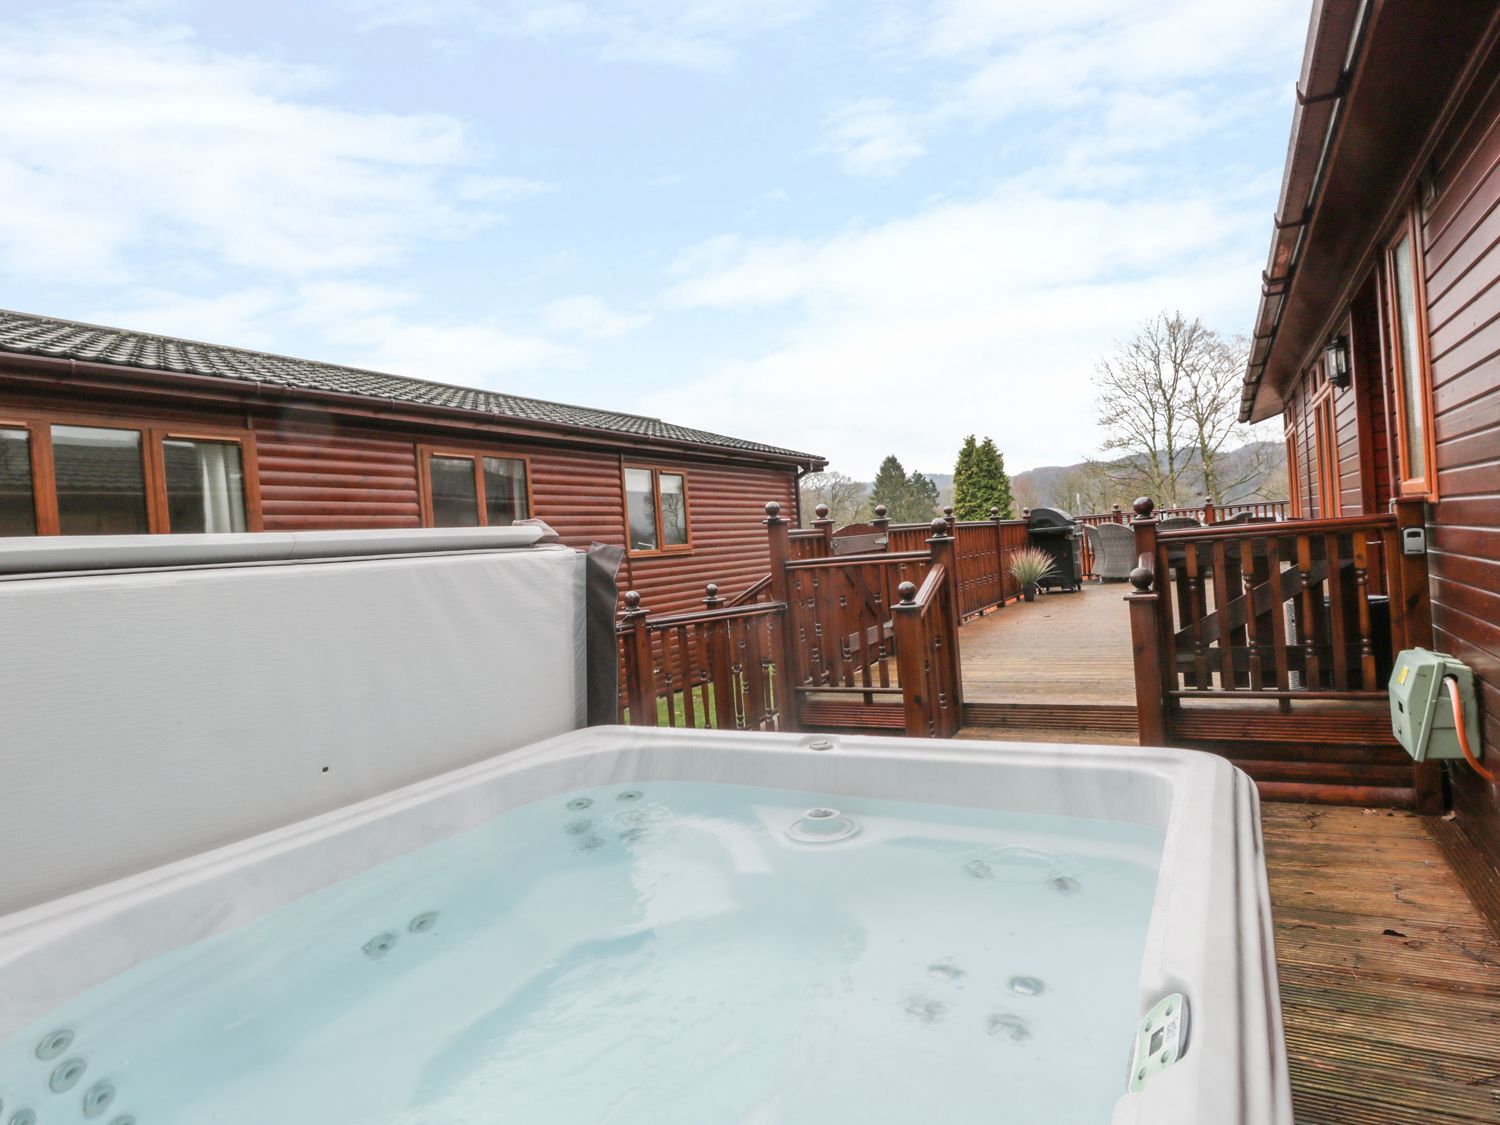 Lakeland View Lodge Bowness Alpha Holiday Lettings